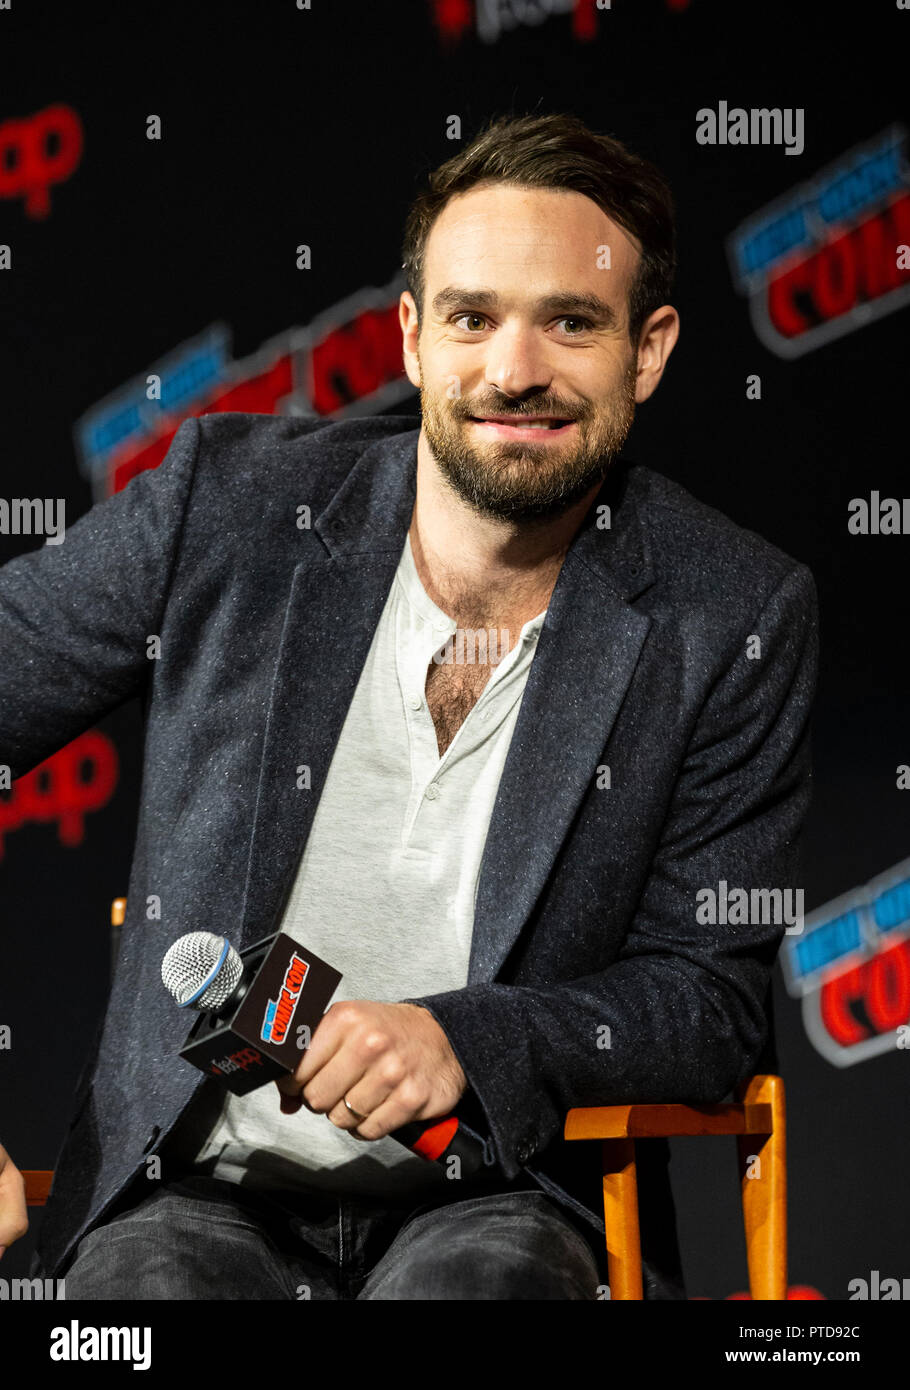 Charlie Cox attends Marvel's DAREDEVIL panel during New York Comic Con at Hulu Theater at Madison Square Garden (Photo by Lev Radin / Pacific Press) Stock Photo